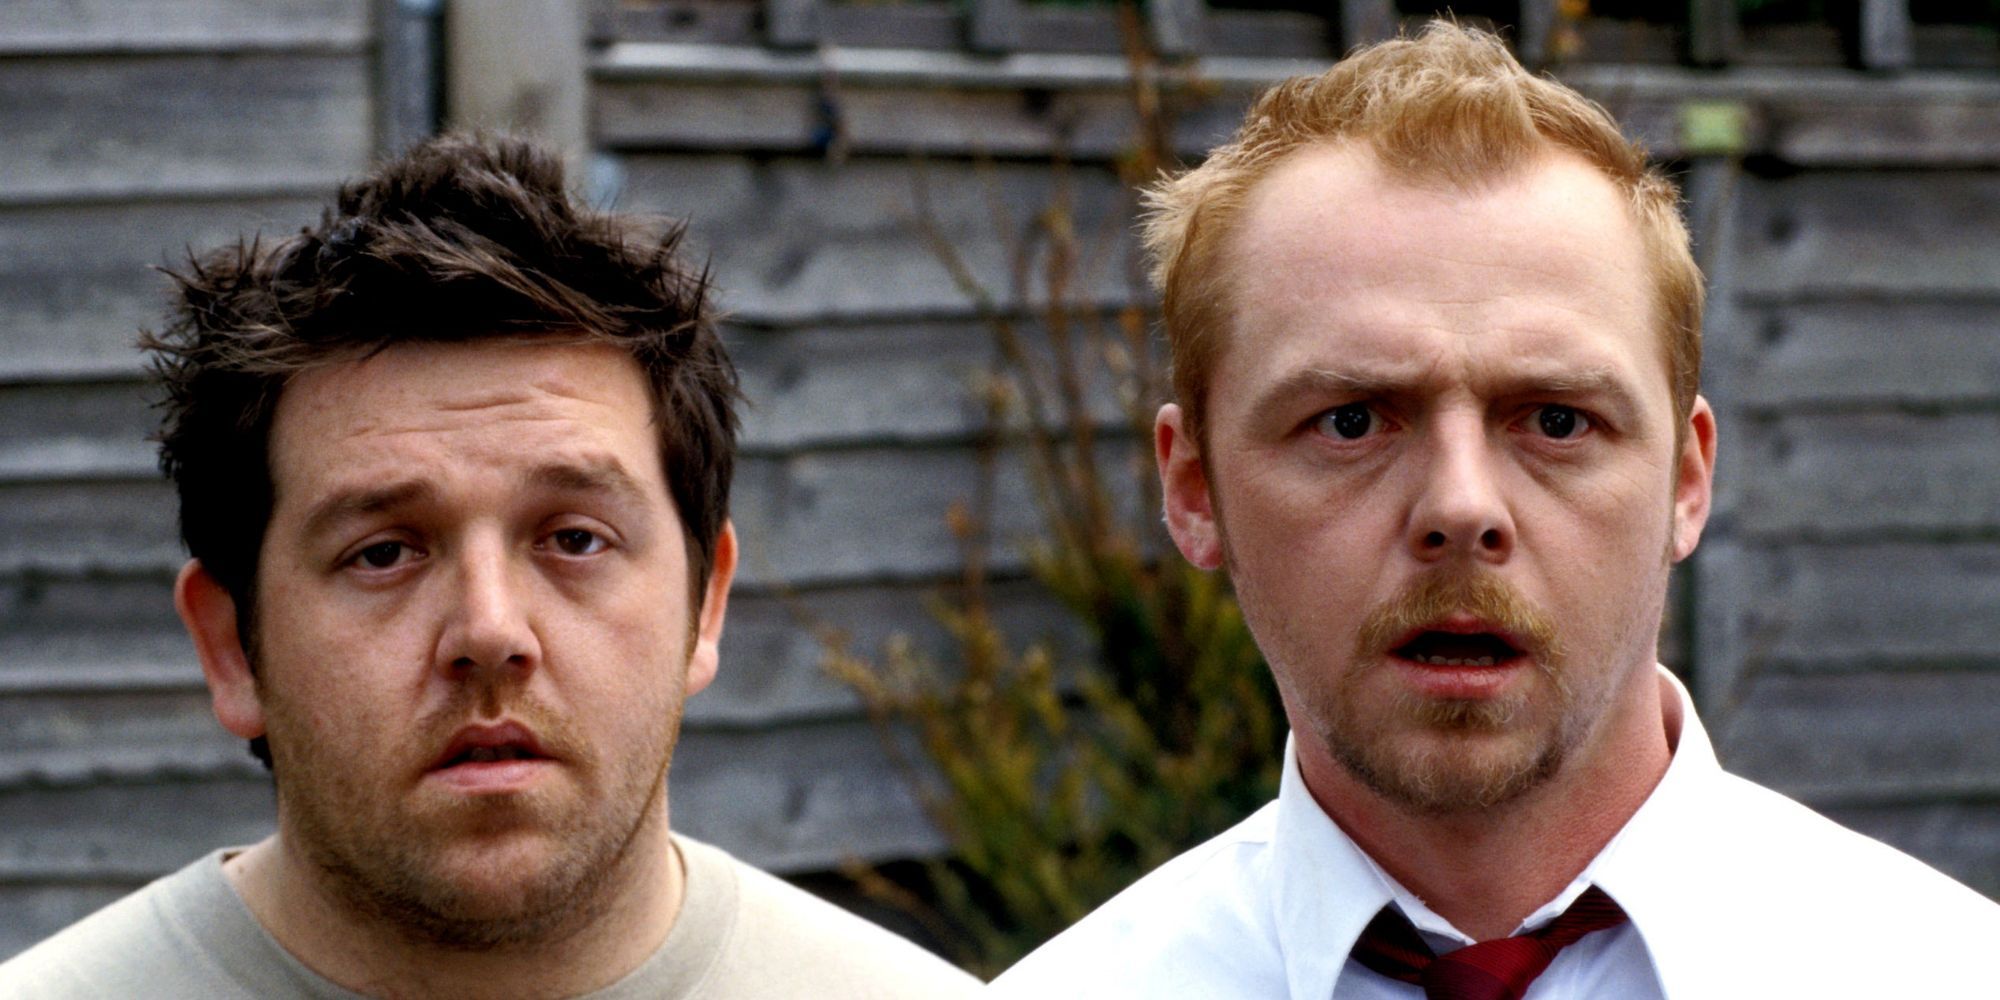 Nick Frost as Ed and Simon Pegg as Shaun in Shaun of the Dead